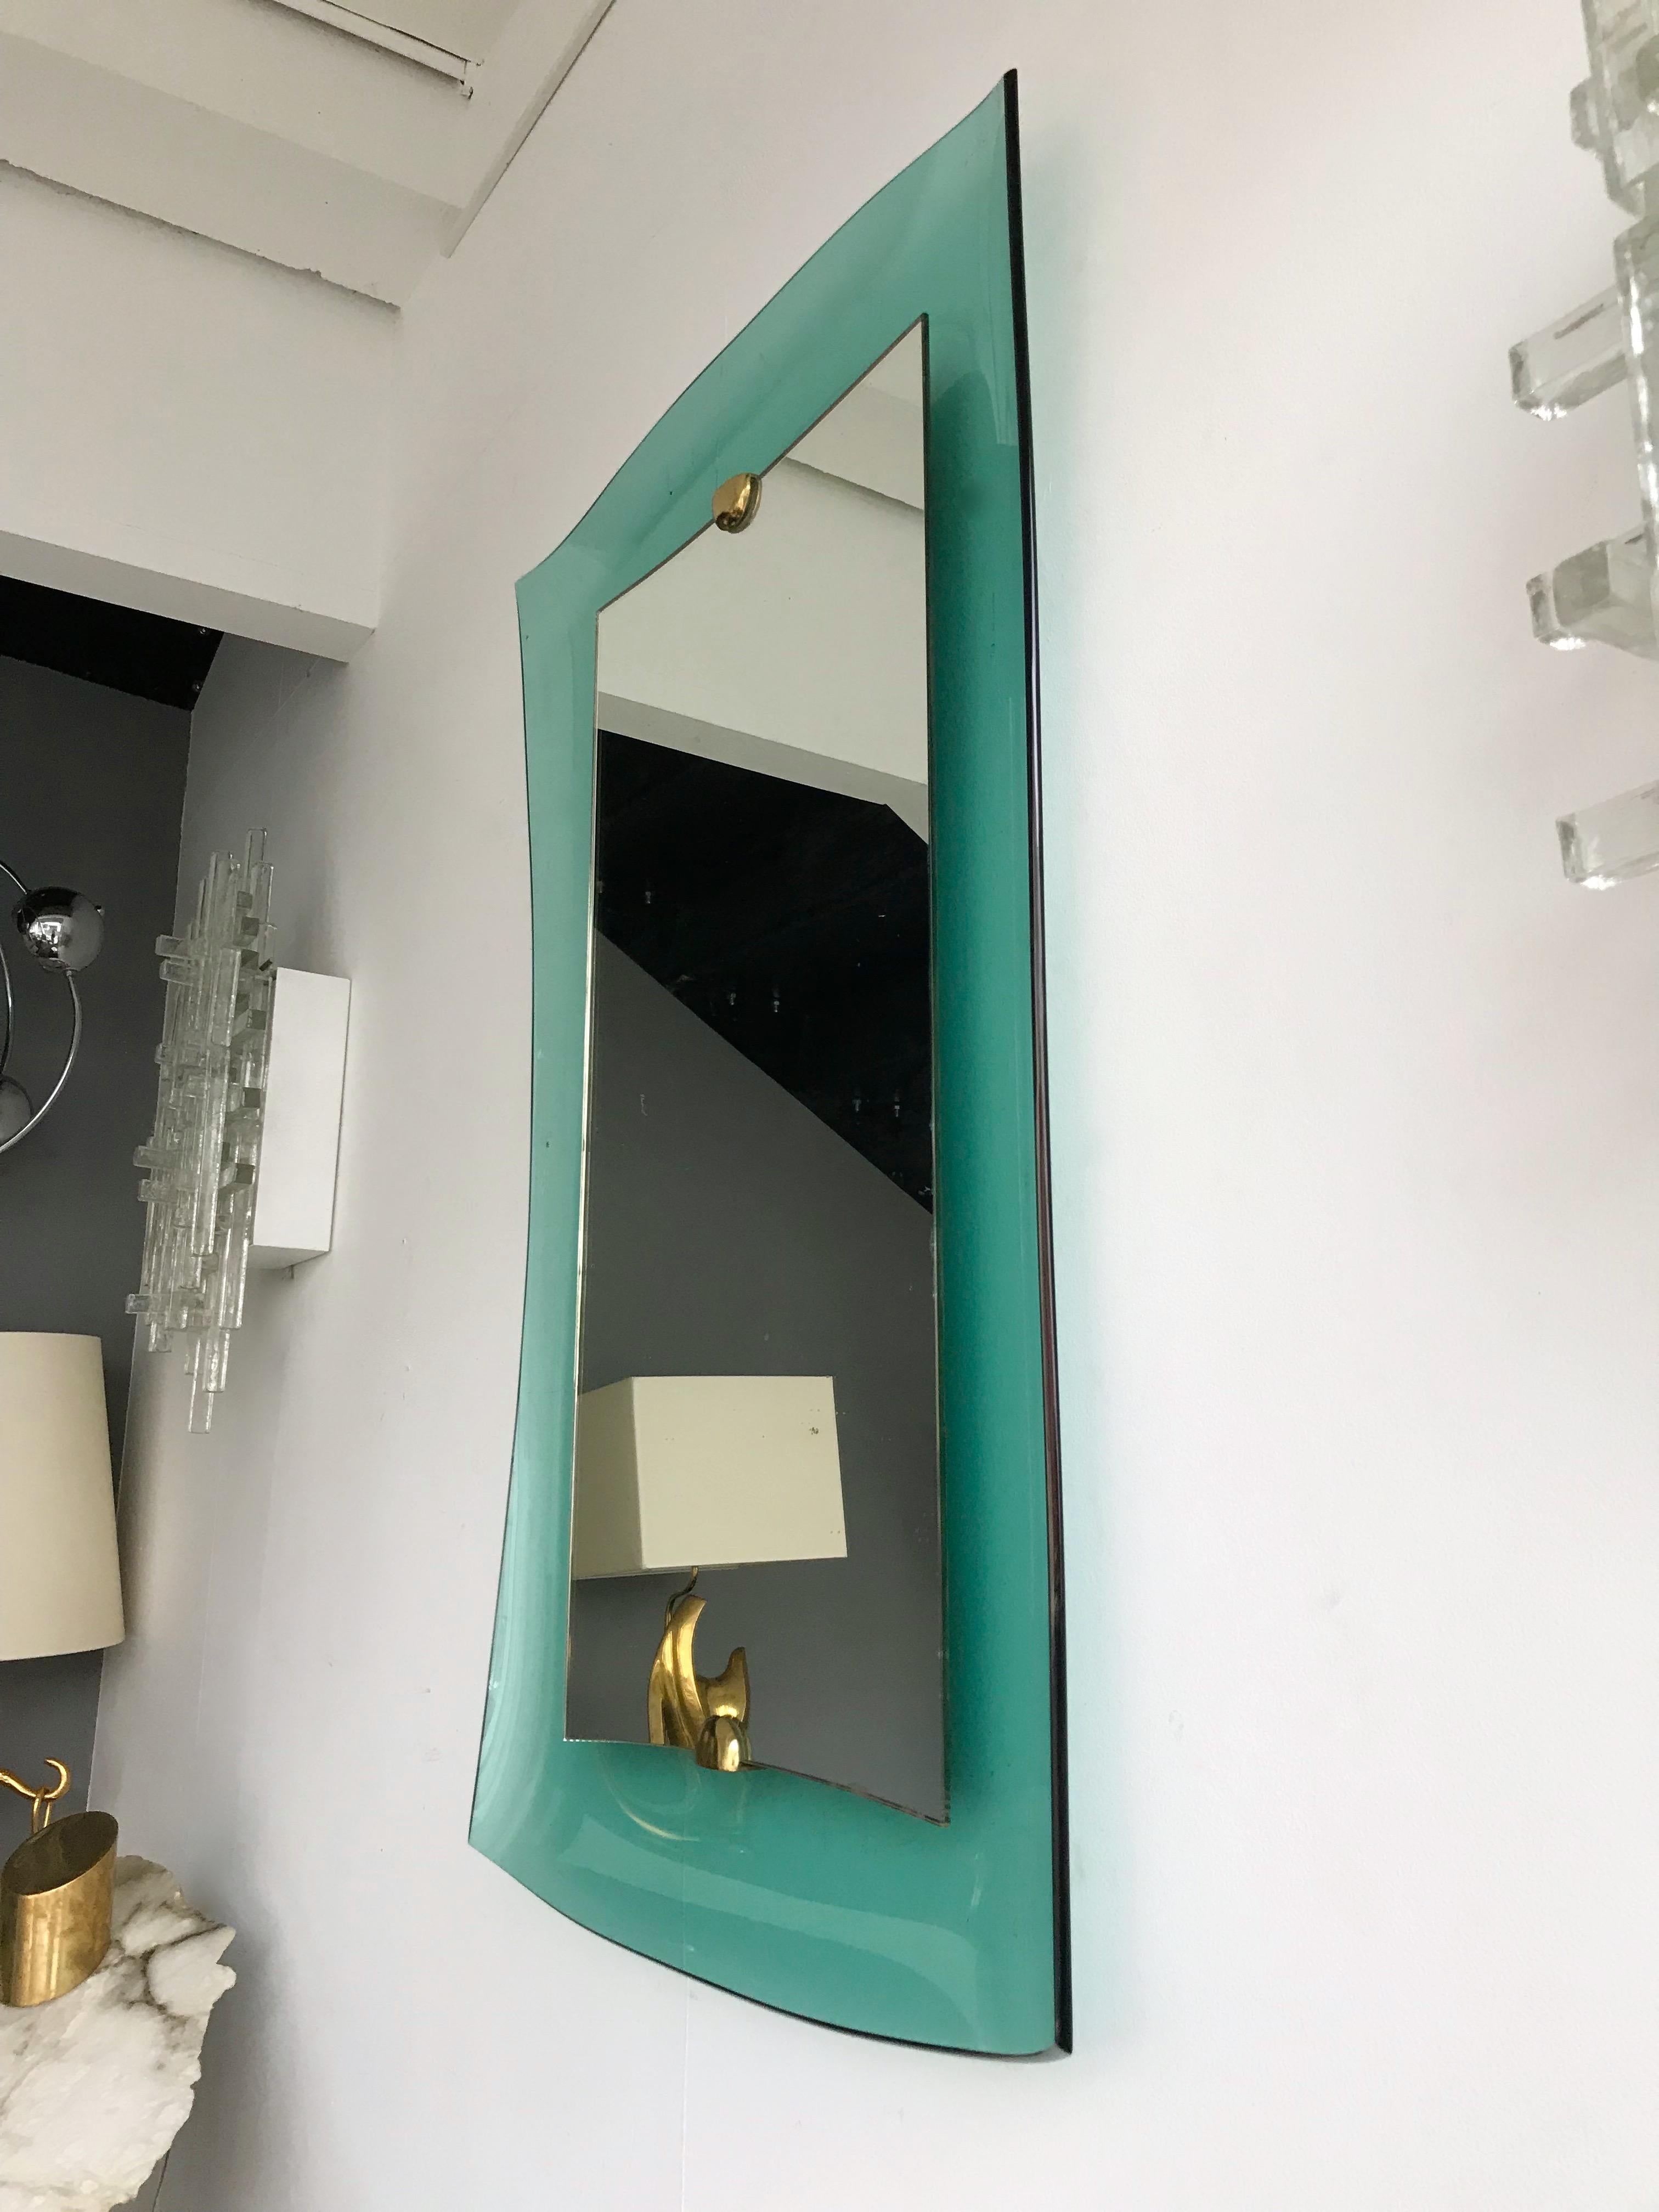 Rare wall mirror in blue turquoise green curve glass, brass elements by the famous crystal and glass manufacture Cristal Art who was the concurrent of Fontana Arte at the same period. The mirror was presented during the Milan furniture fair in 1962